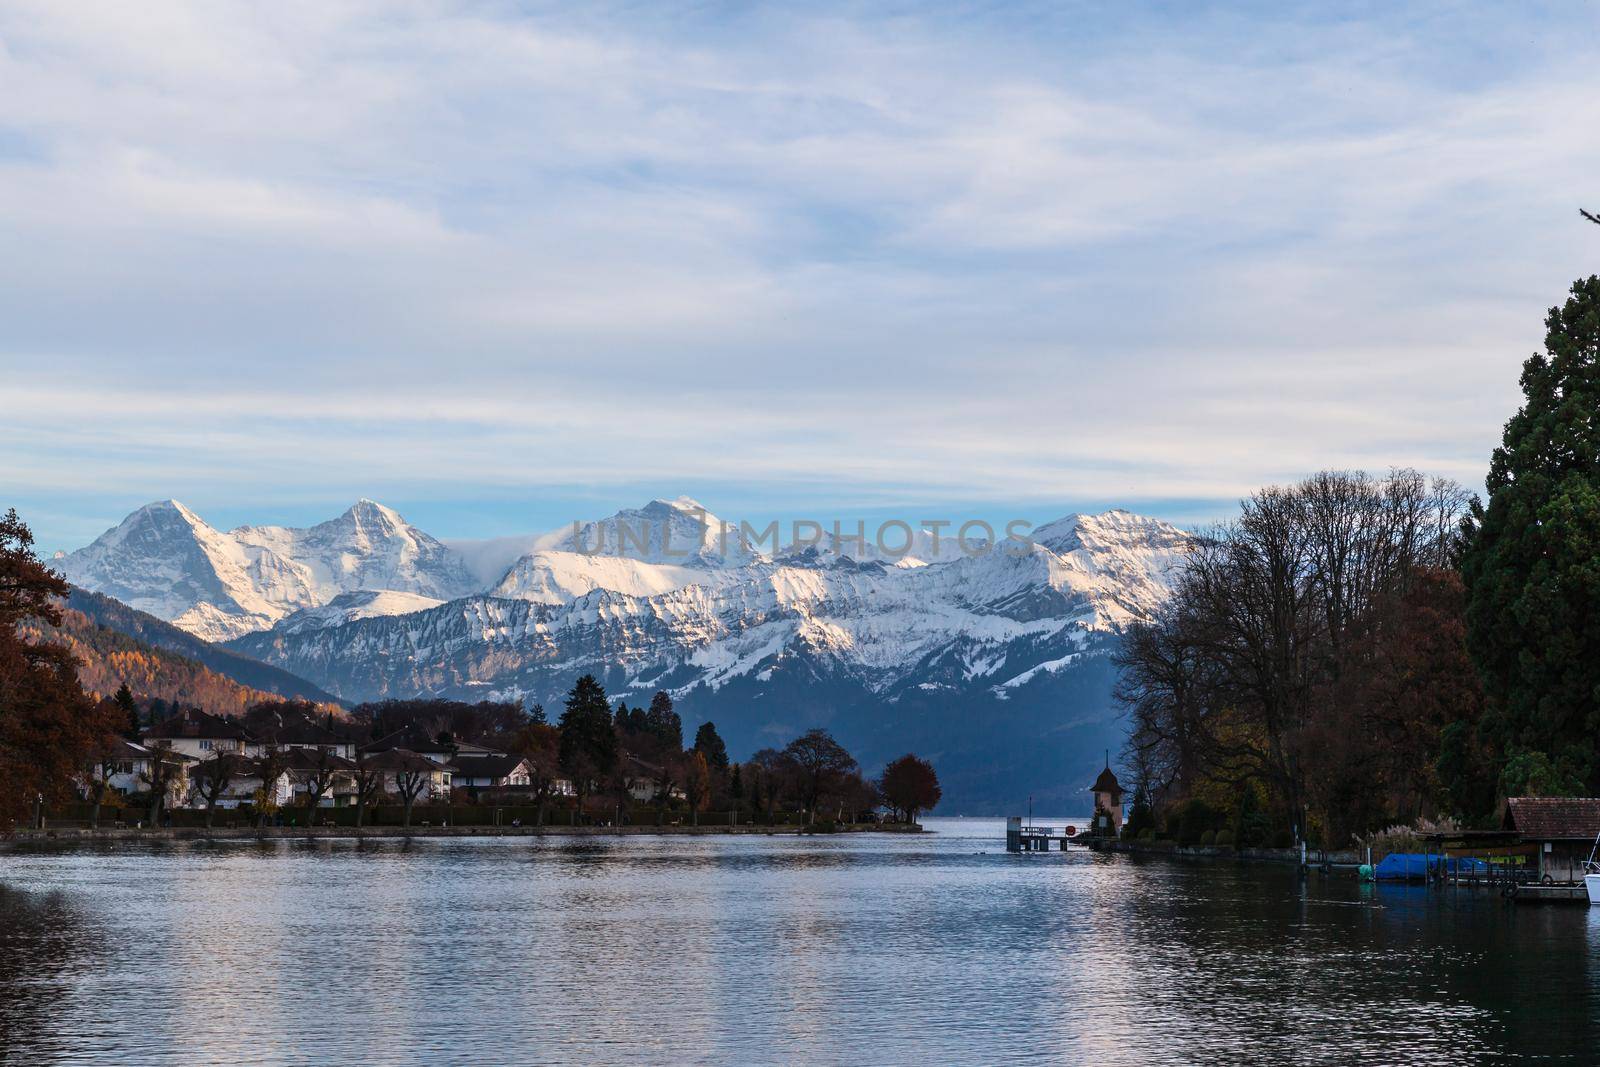 Panorama view of the lake Thun and Bernese Apls including Jungfrau, Monch and Eiger Northface from the lakeside of Thun, Canton of Bern, Switzerland.